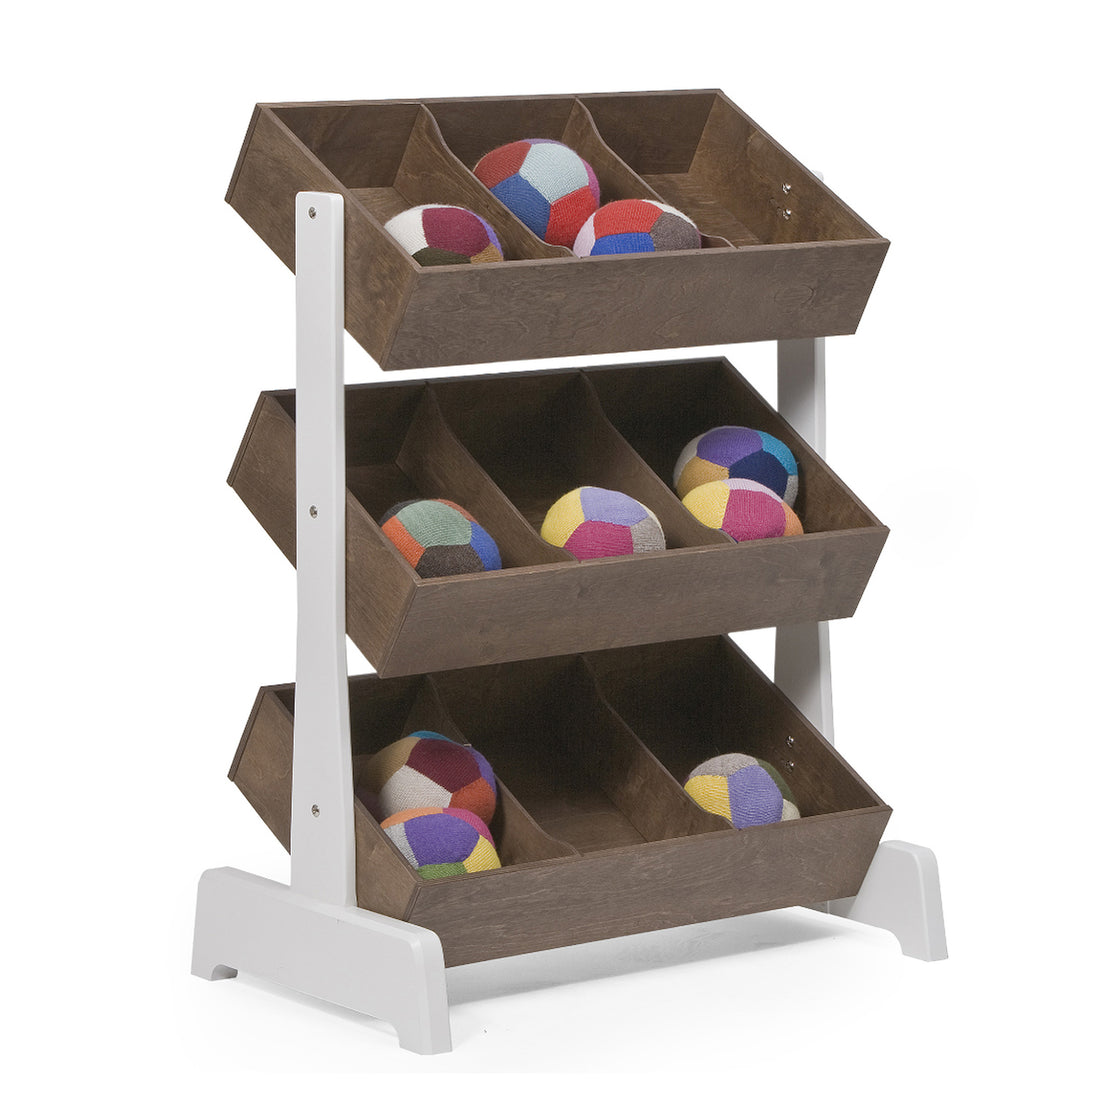 Oeuf Toy Store Walnut (Pre-Order; Est. Delivery in 6-10 Weeks)